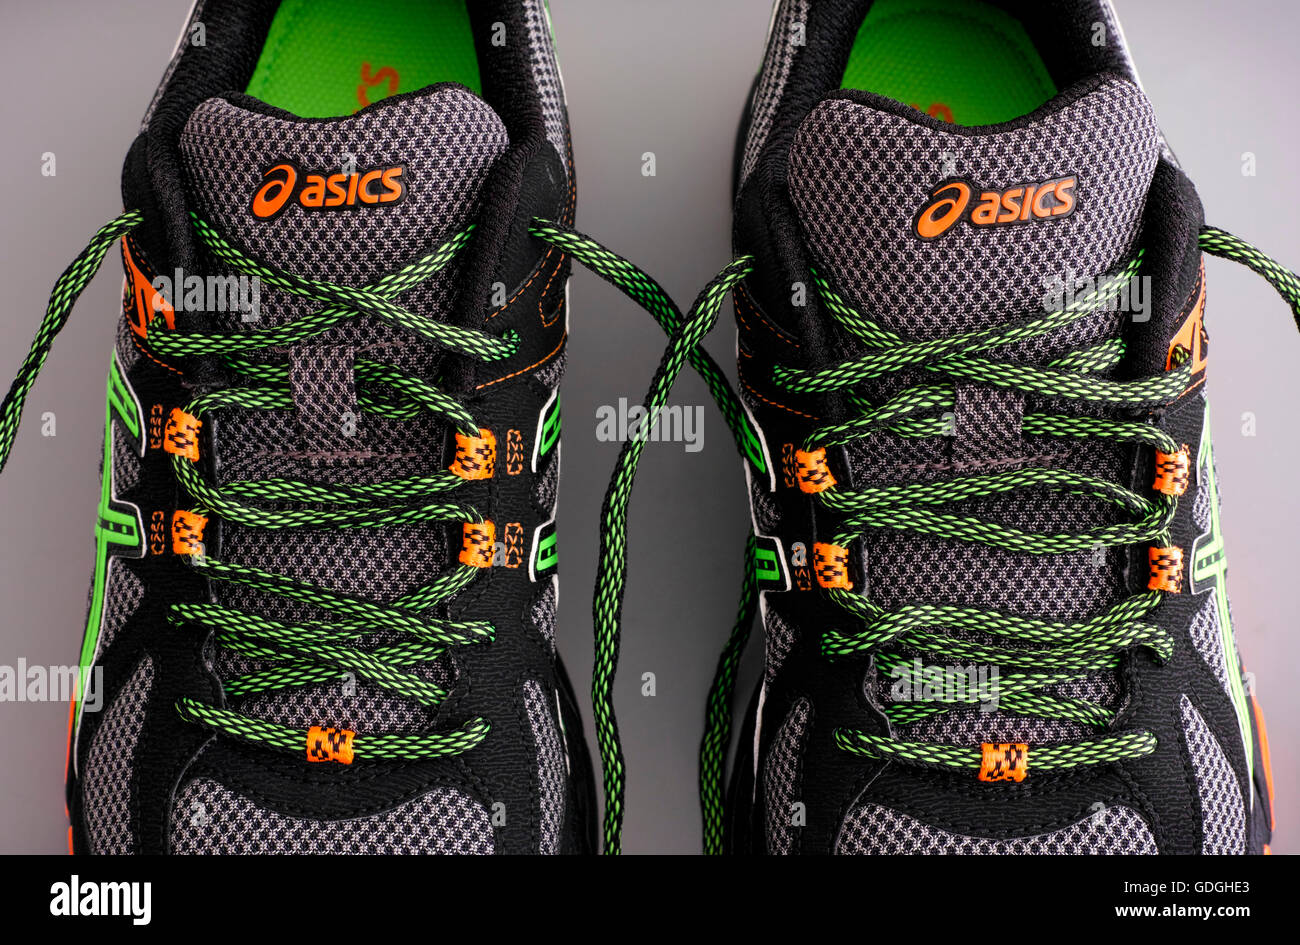 oasis shoes 2015